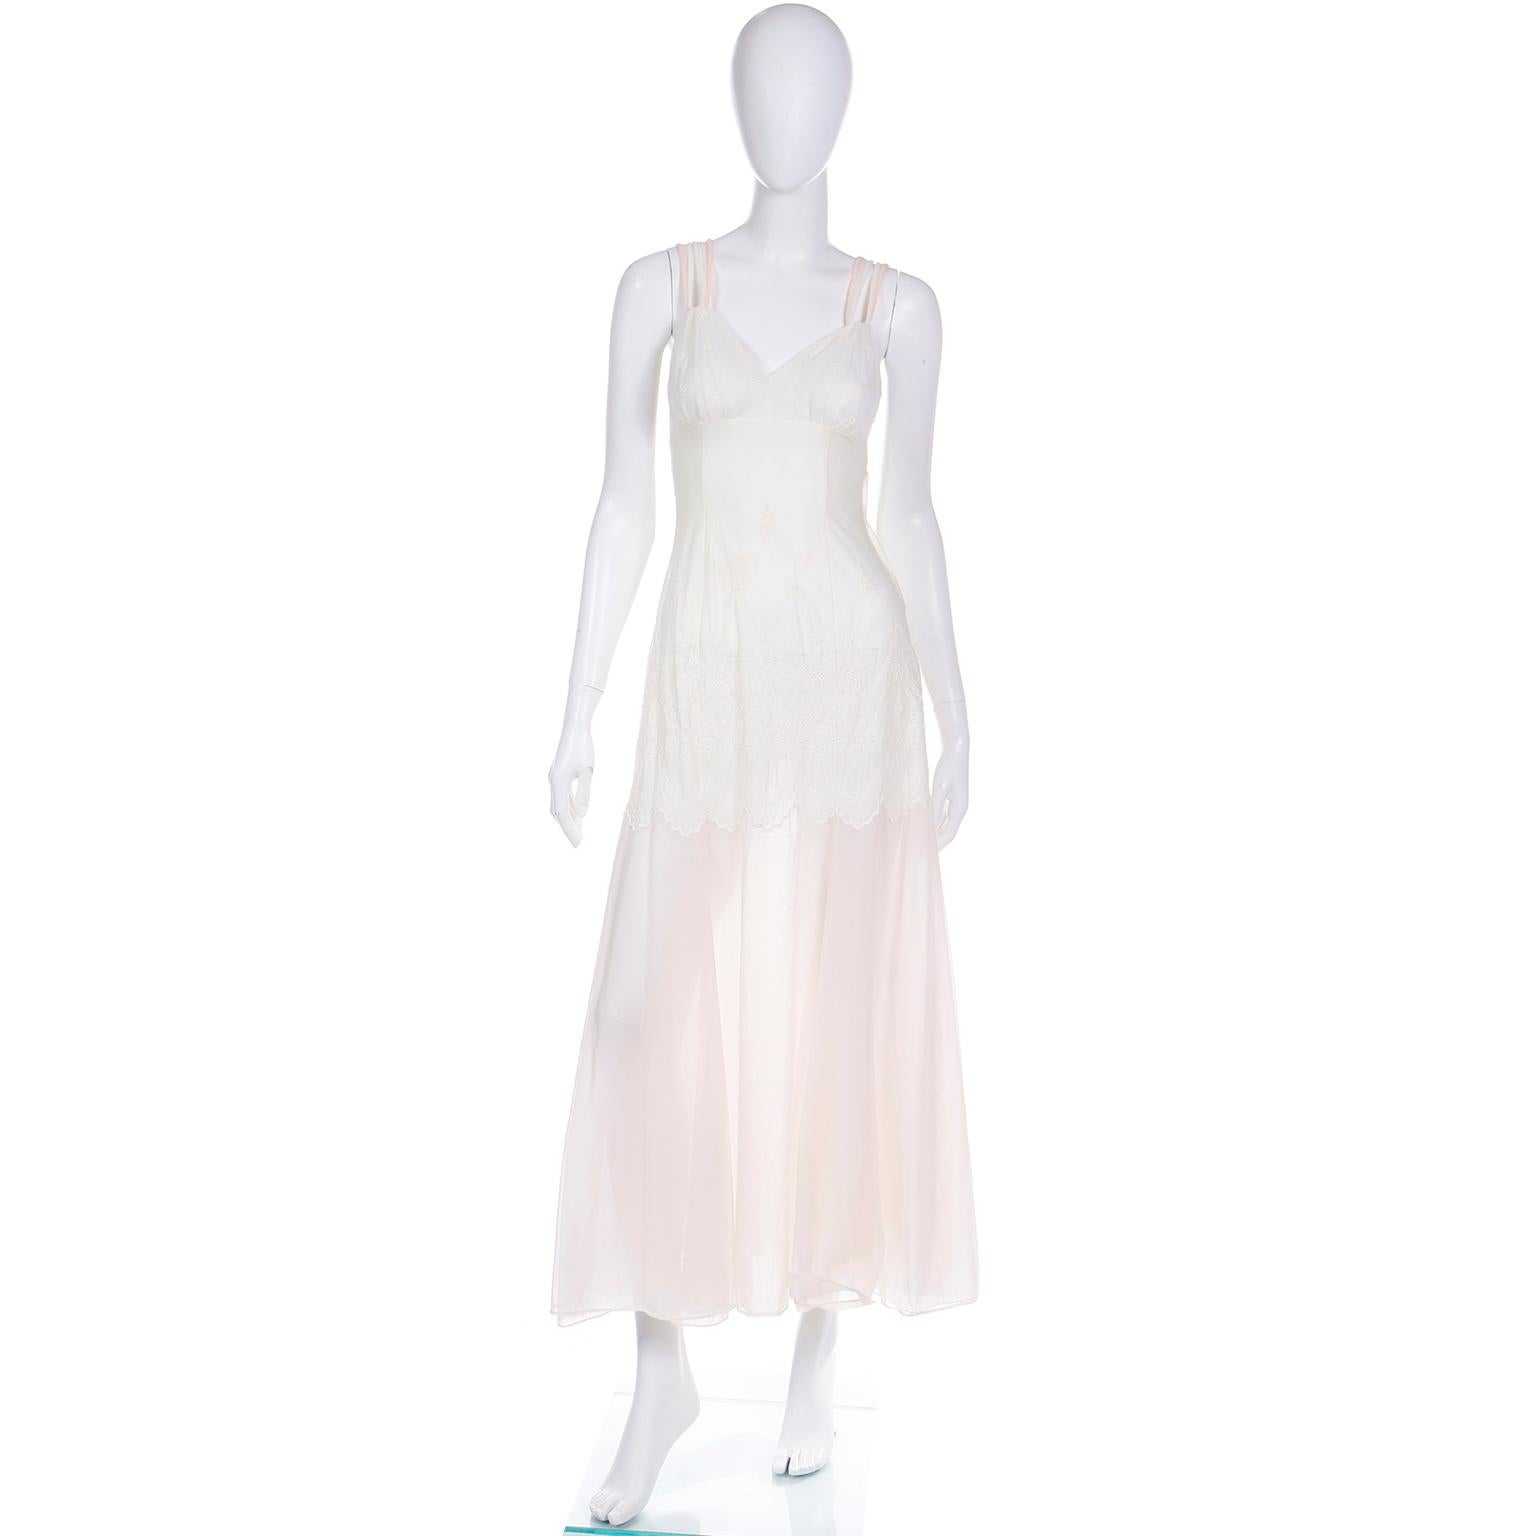 This rare vintage Schiaparelli 2 piece peignoir set is in a light pink and ivory nylon chiffon that takes on an almost ombre effect. This 2 piece set has beautiful details and is from the 1950's.
The long, sheer nightgown has a unique almost mermaid